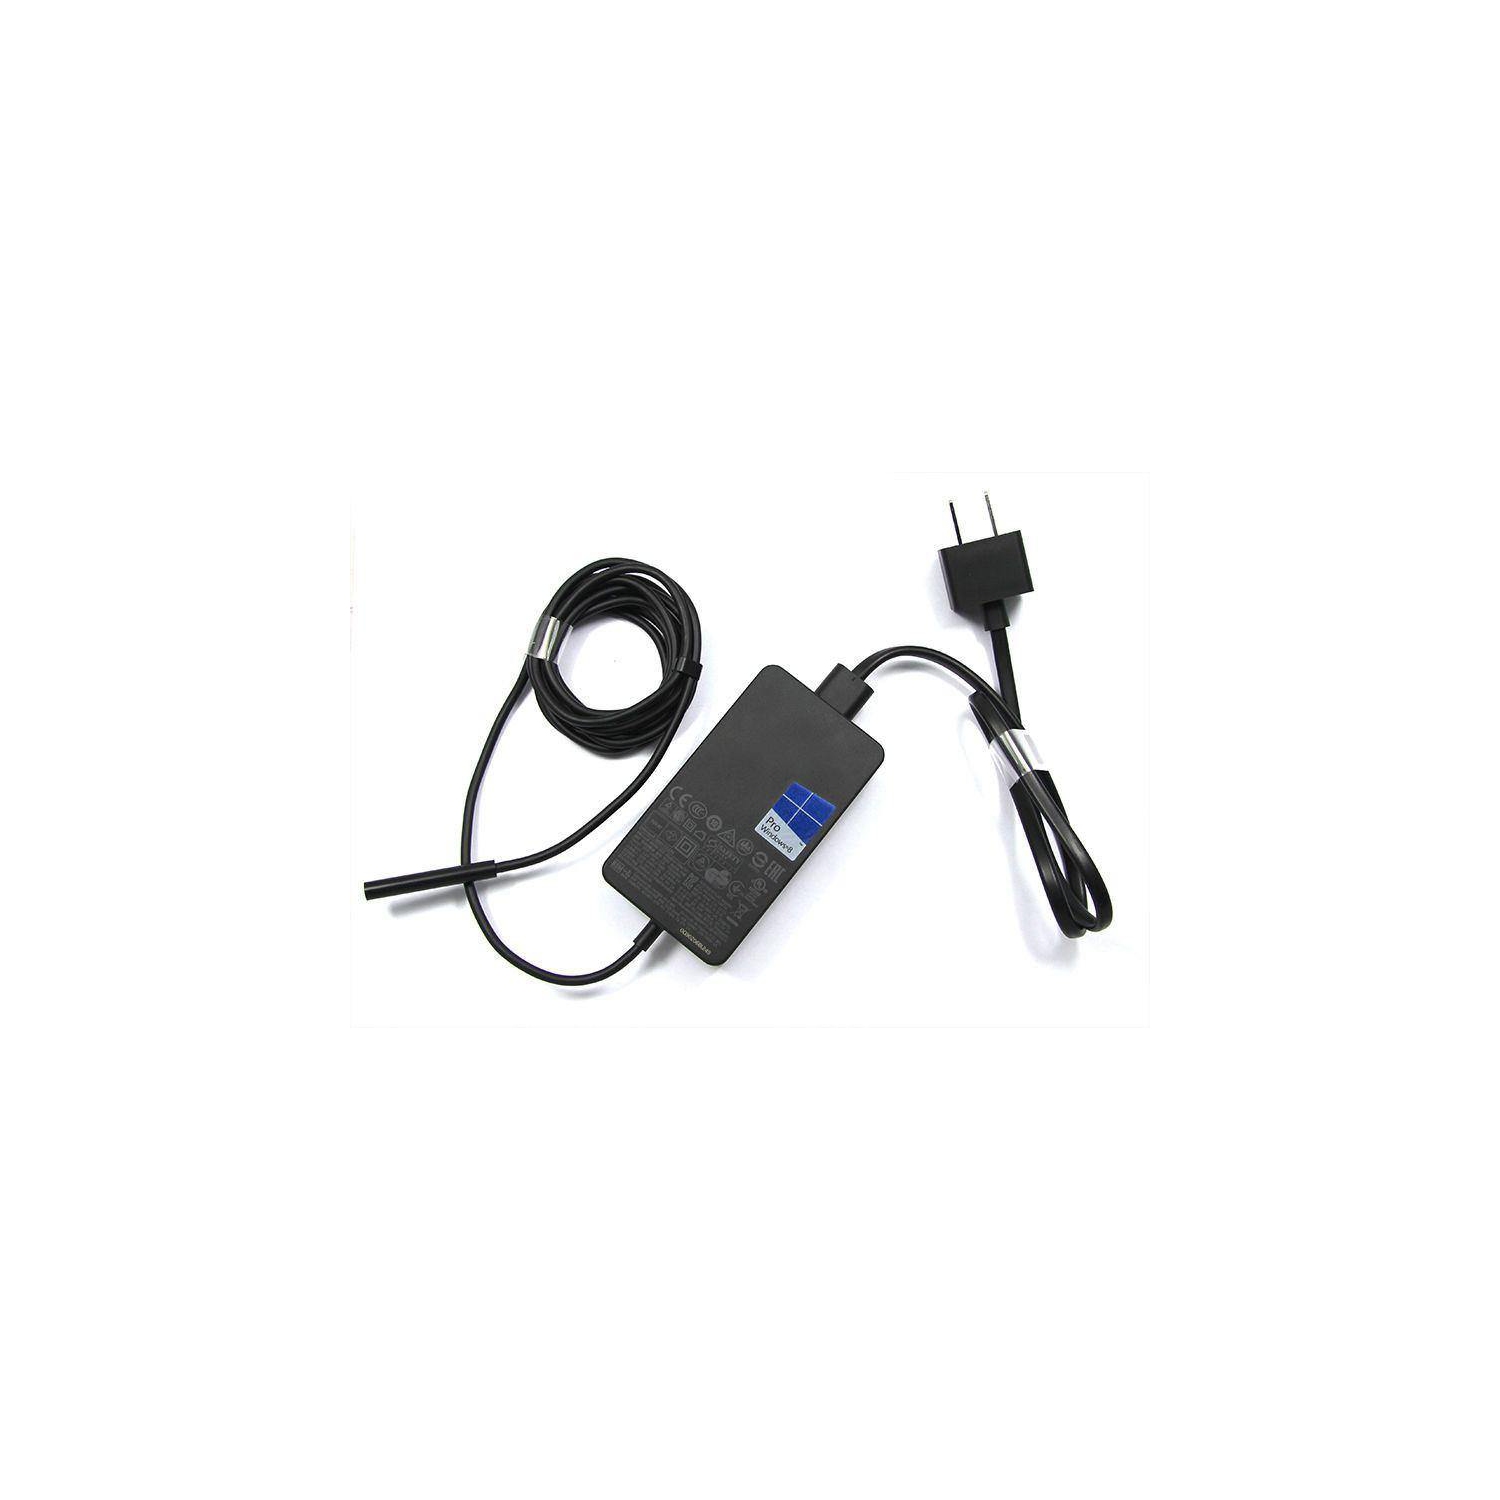 New Genuine Microsoft Surface Pro 3 1631 AC Power Adapter Charger 36W 12V 2.58A 5V 1.0A